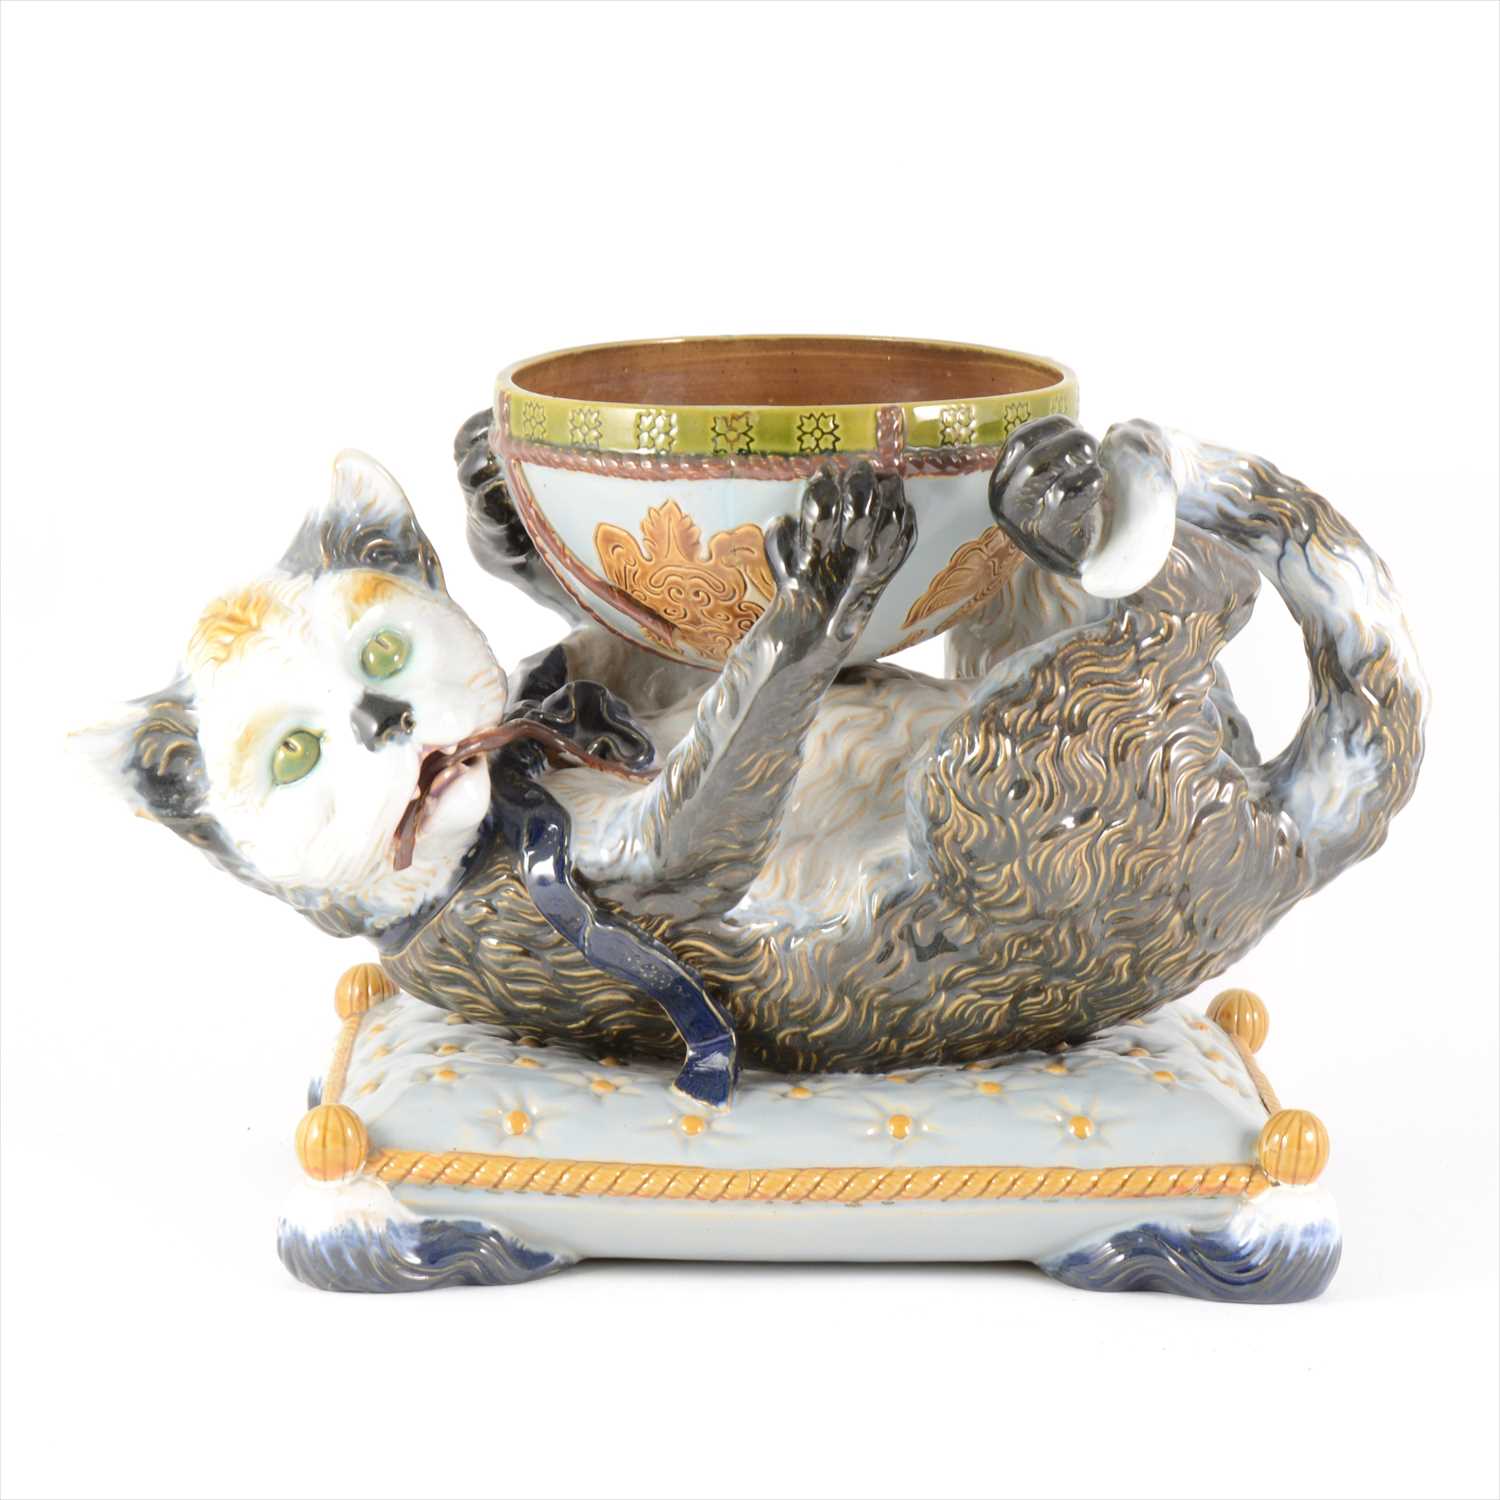 Lot 24 - A continental majolica bowl with reclining cat, by Gerbing & Stephan